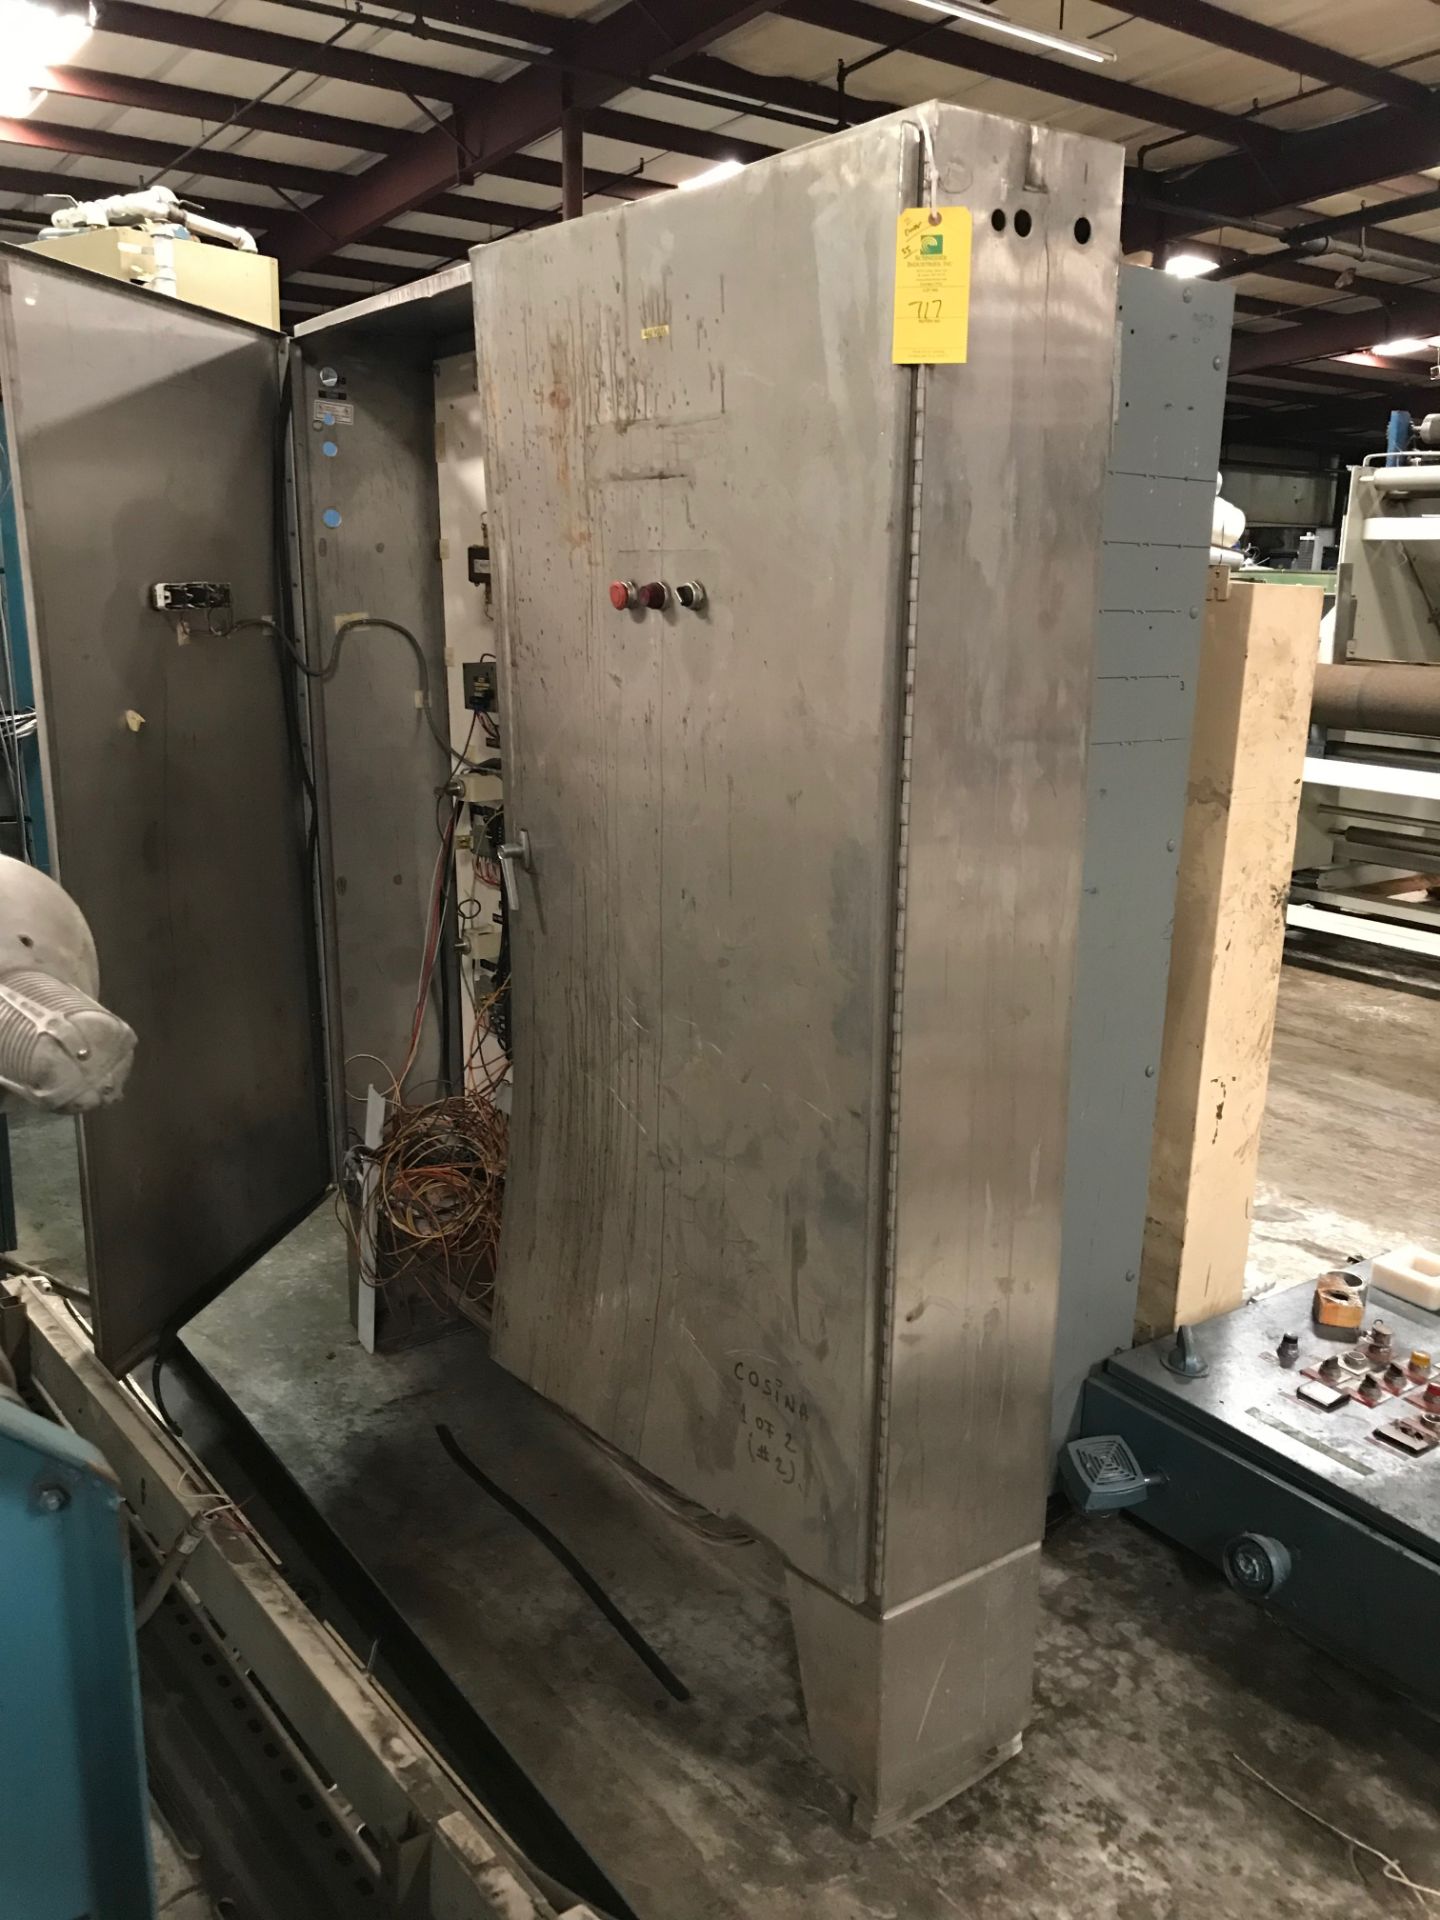 2 Door Stainless Steel Electrical Enclsoure Cabinet w/ Contents, Rigging Fee For This Item Is $25